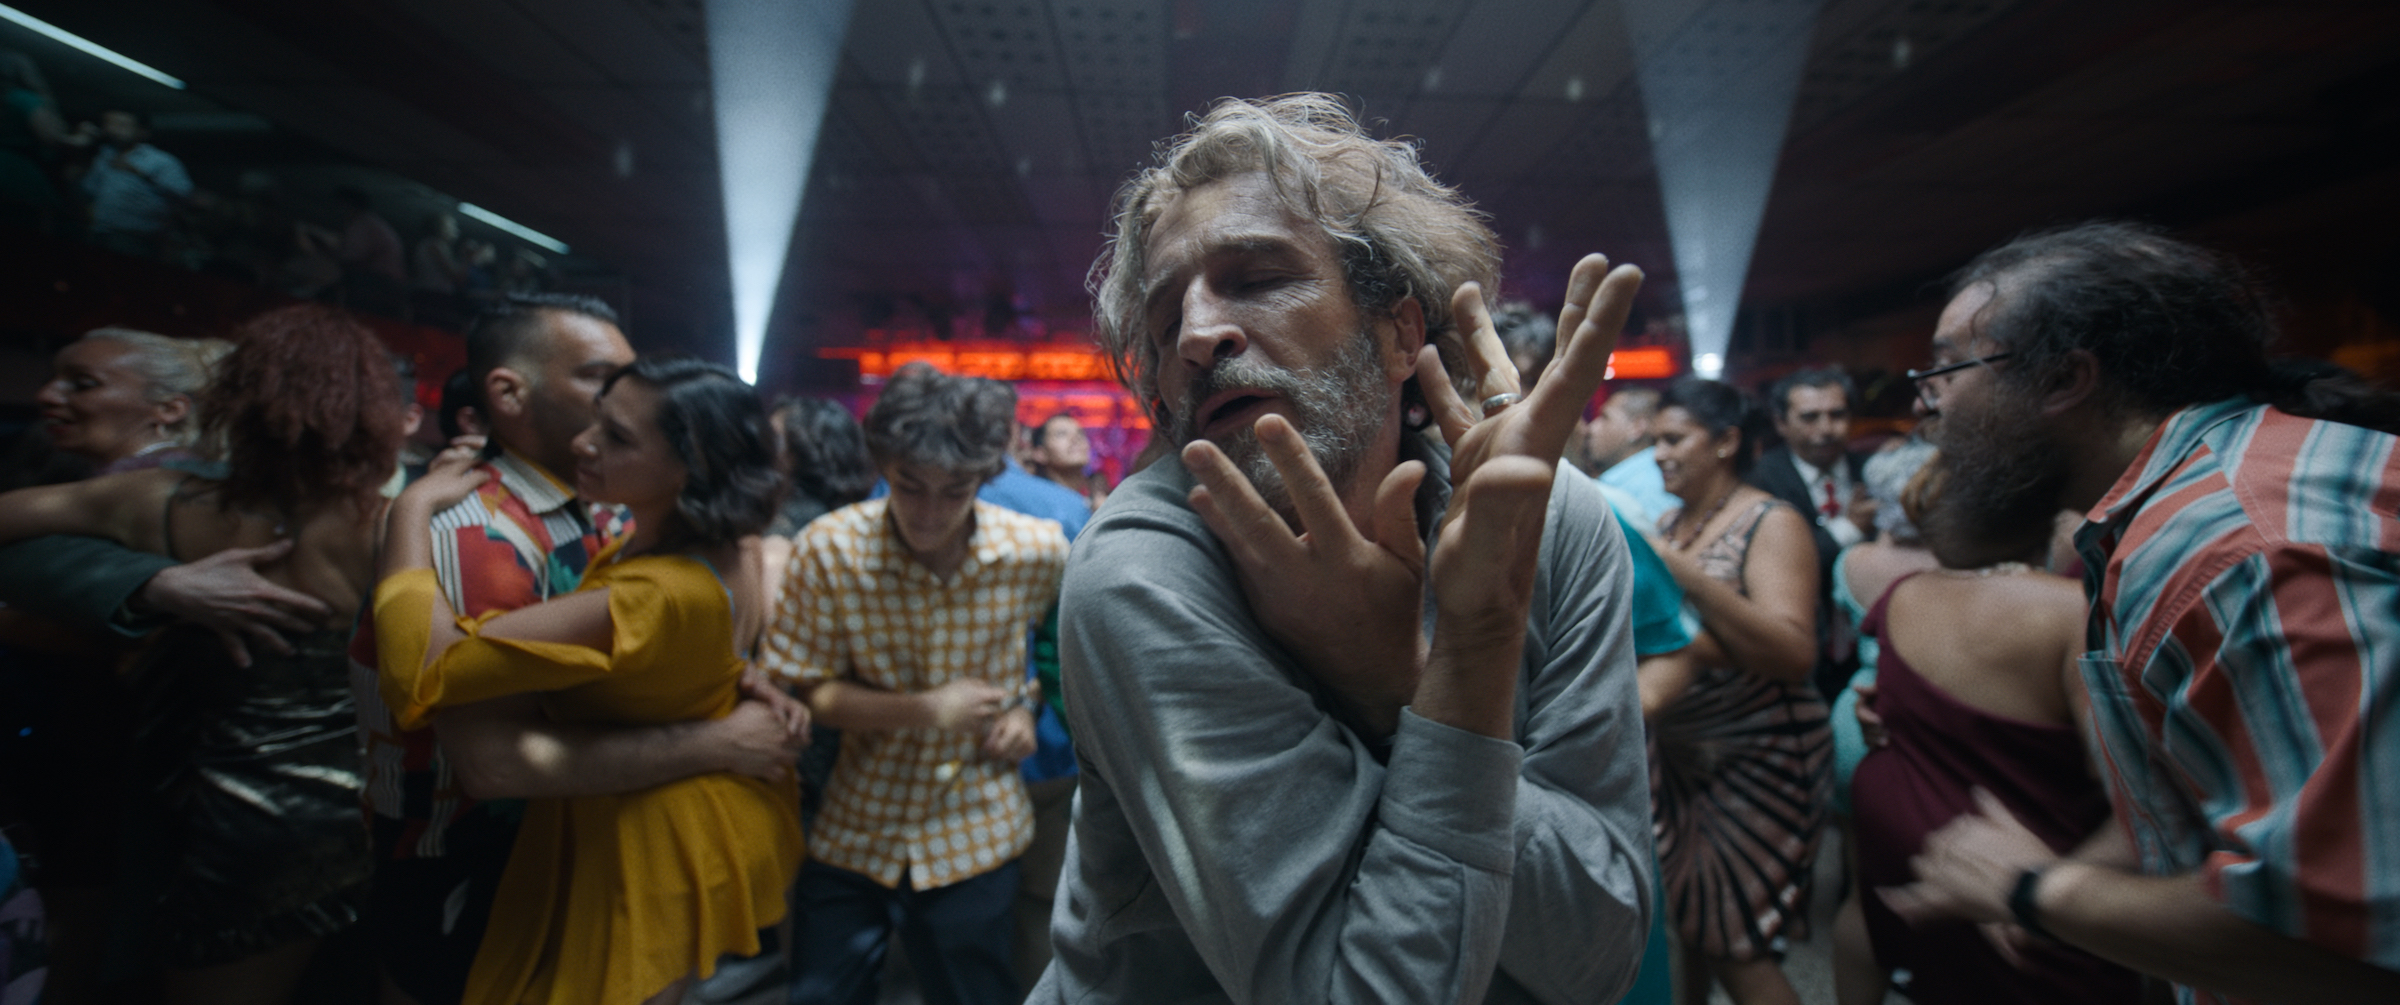 Daniel Giménez Cacho dances alone on a crowded dance floor, hands weaving in front of his face.